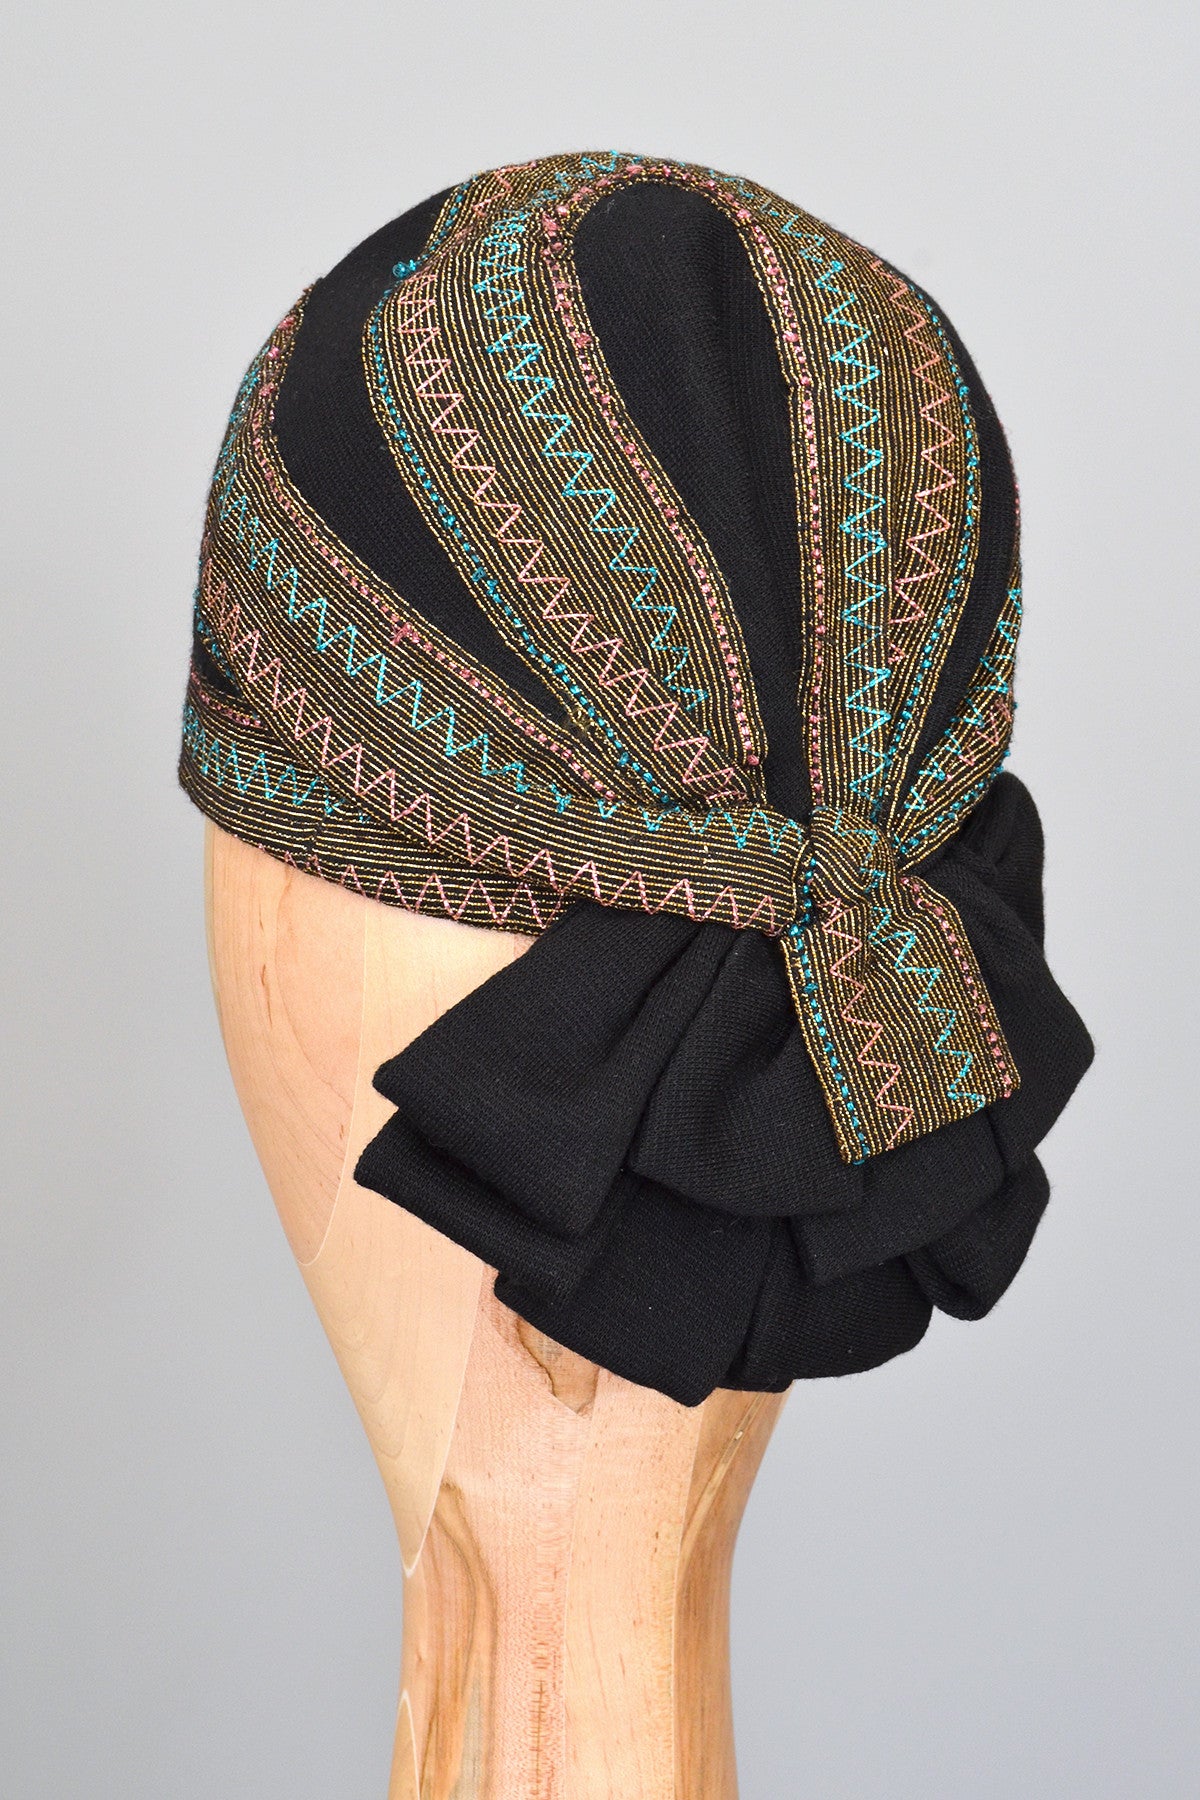 1950s Black Cloche Turban with Blue Pink Gold Metallic Weave